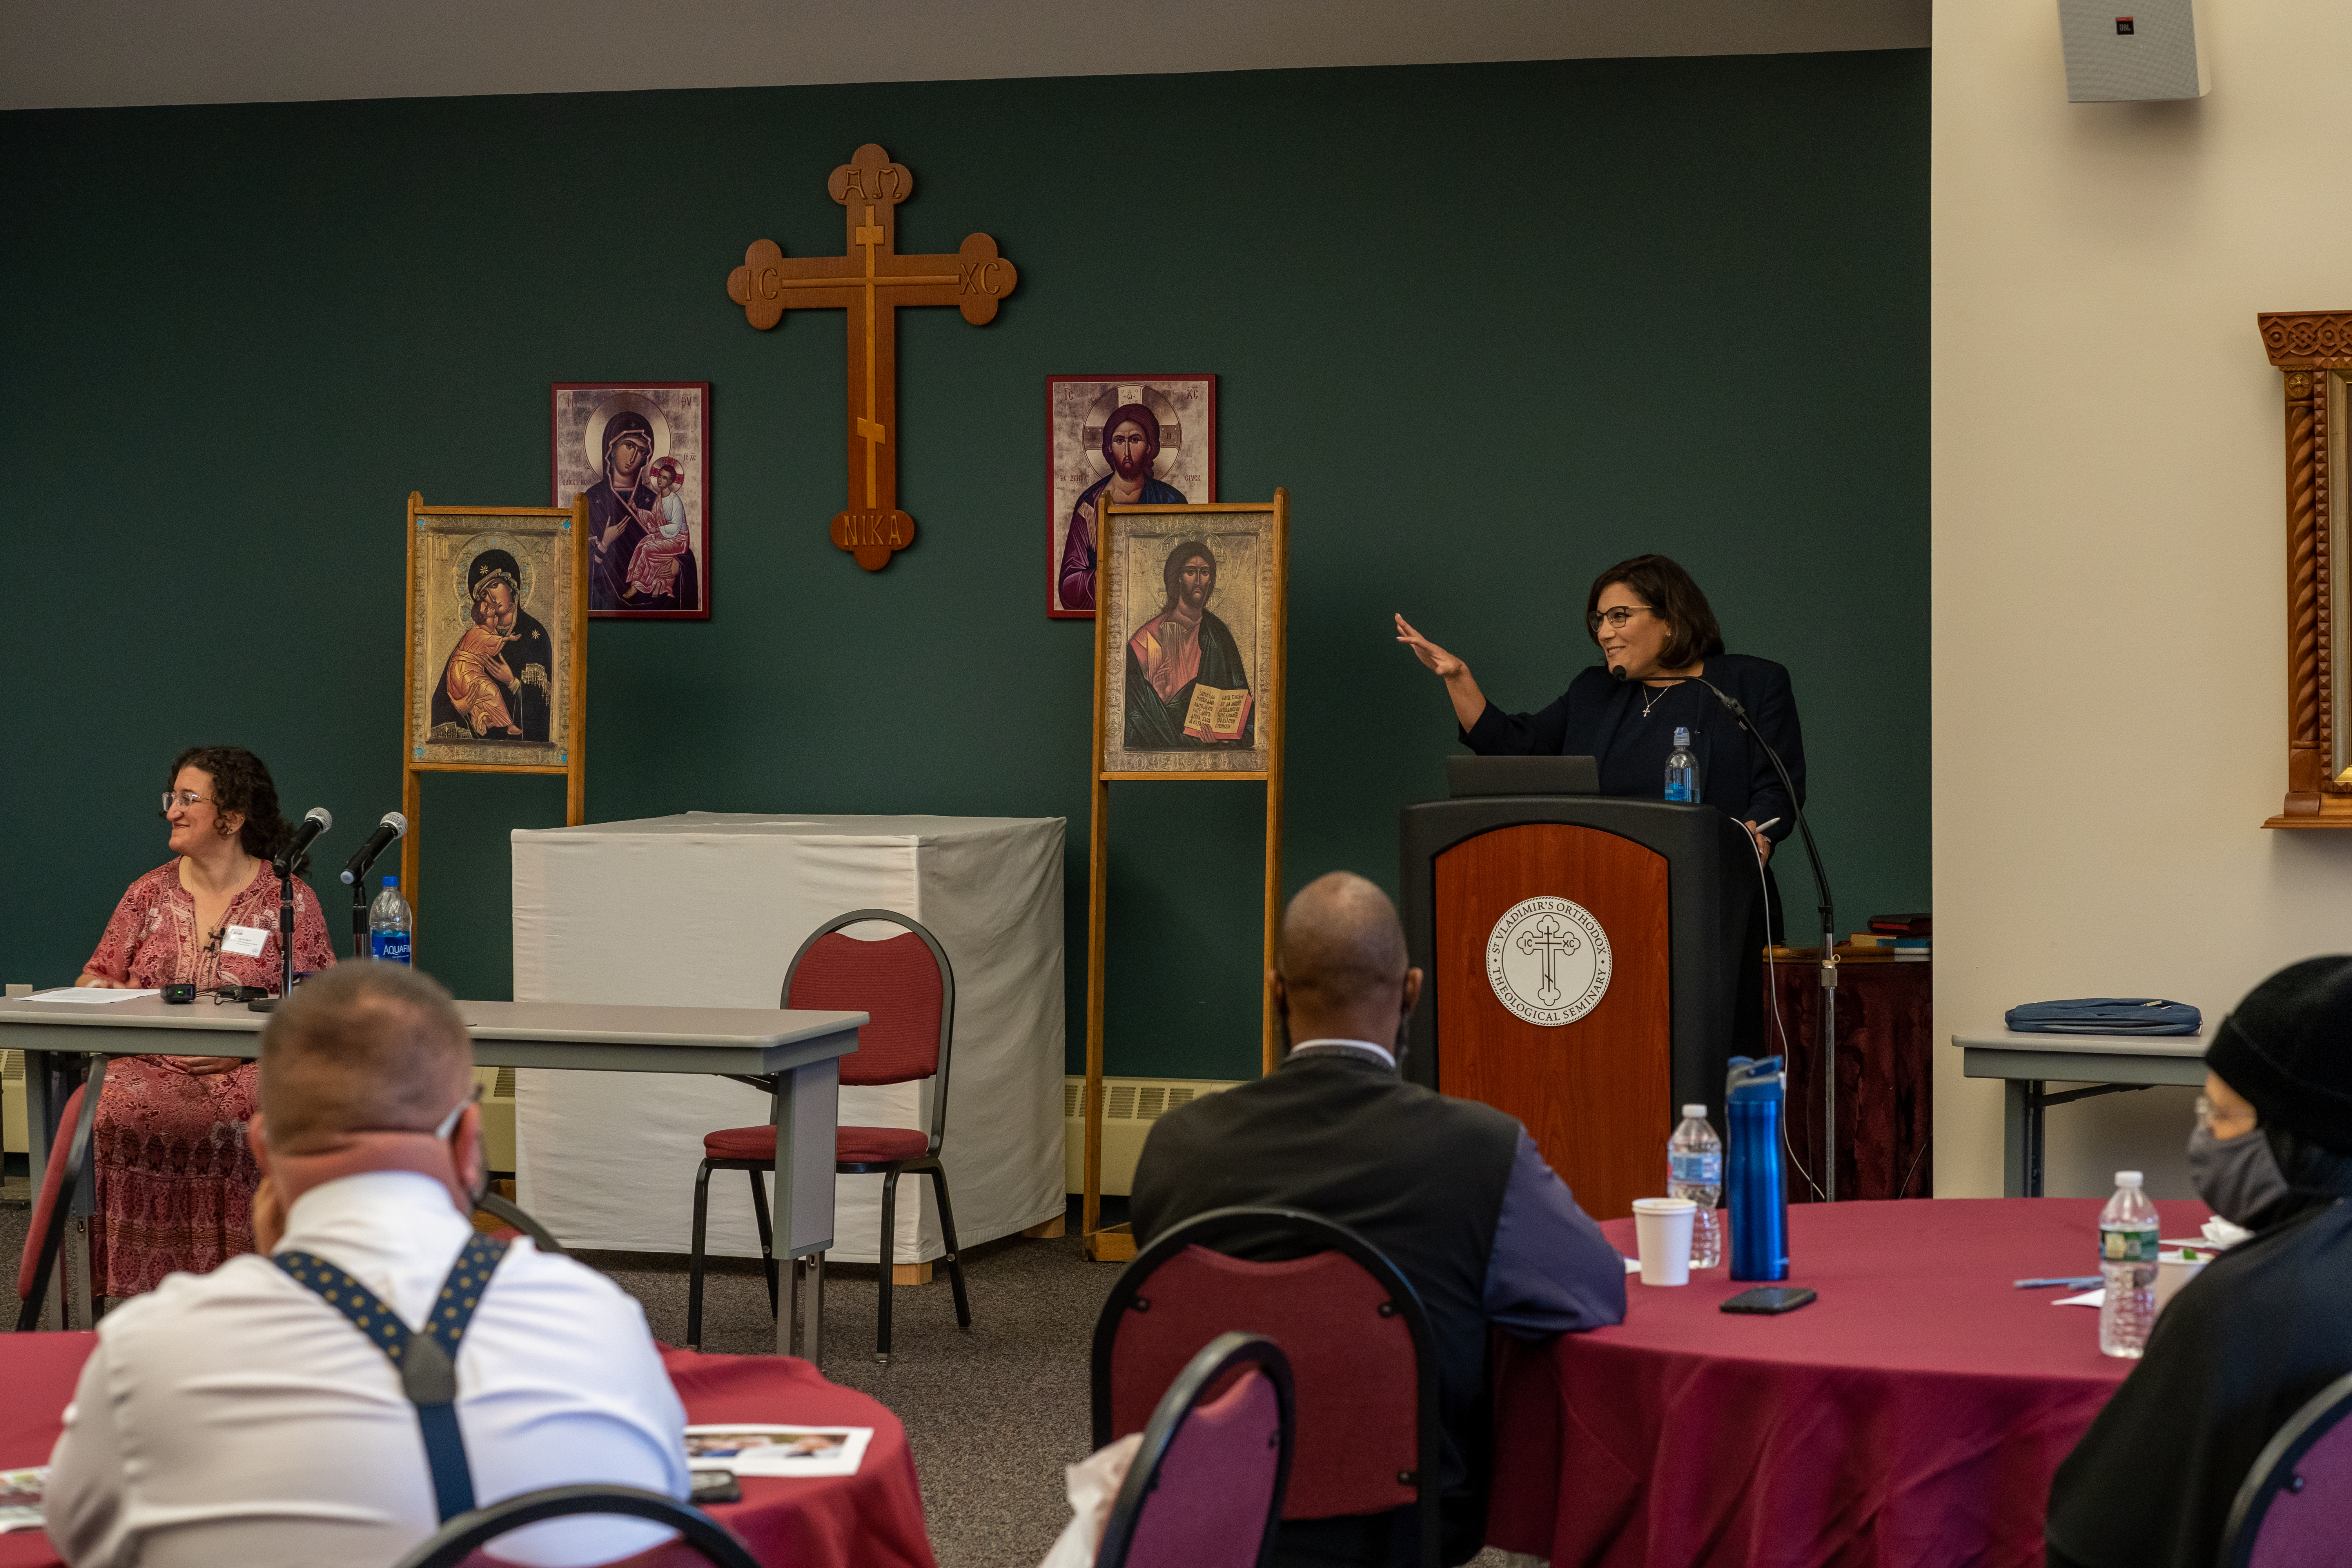 Scenes from the National Orthodox Advanced Leadership Conference